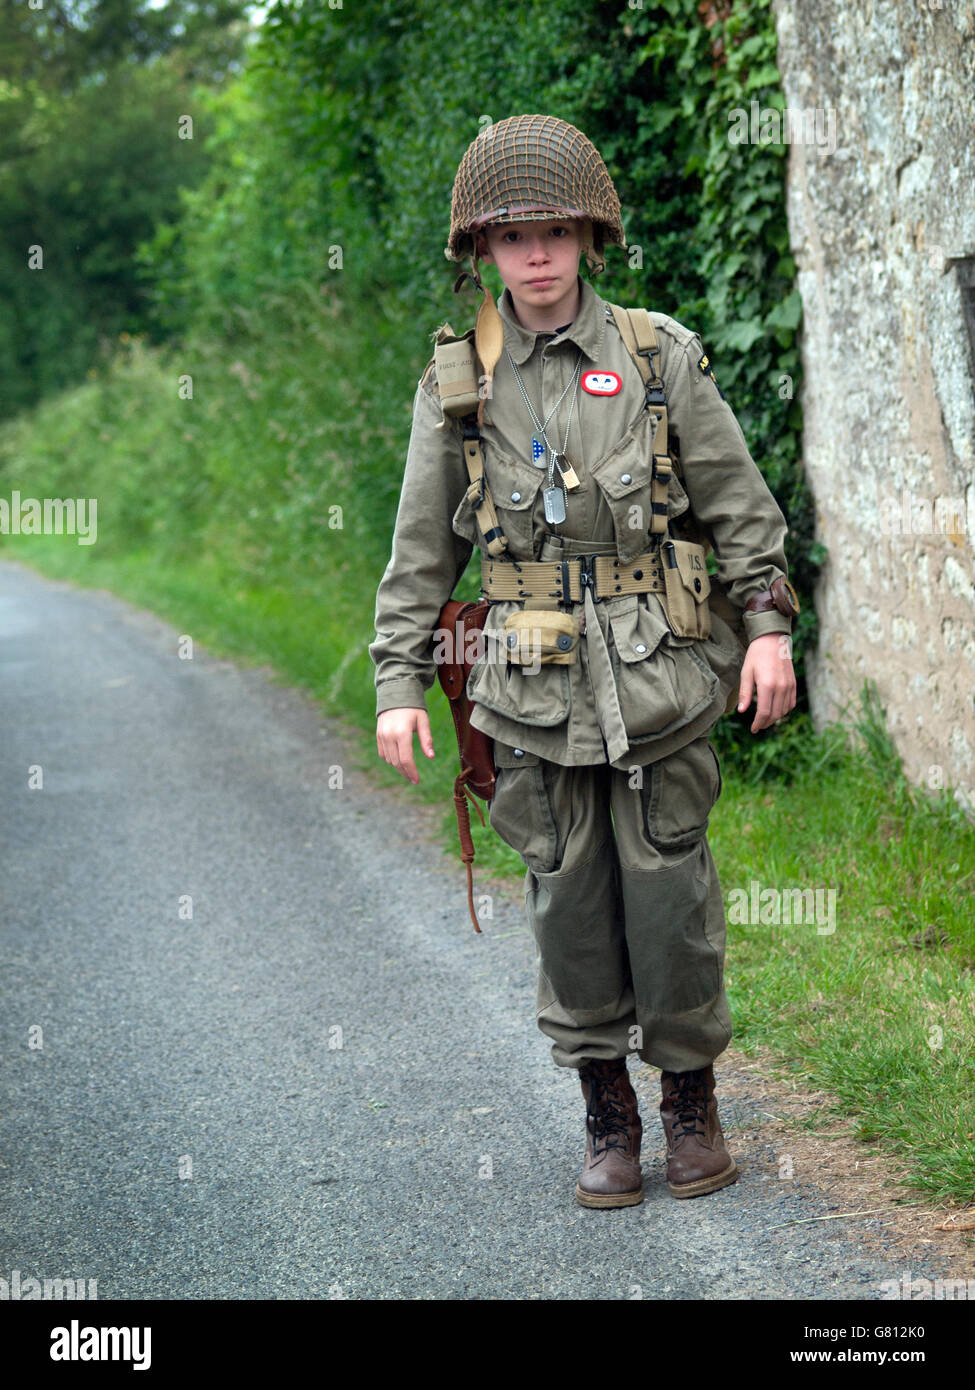 Near to the town of Carentan the 72nd anniversary of the Battle of Normandy is commemorated by locals in period army costume Stock Photo